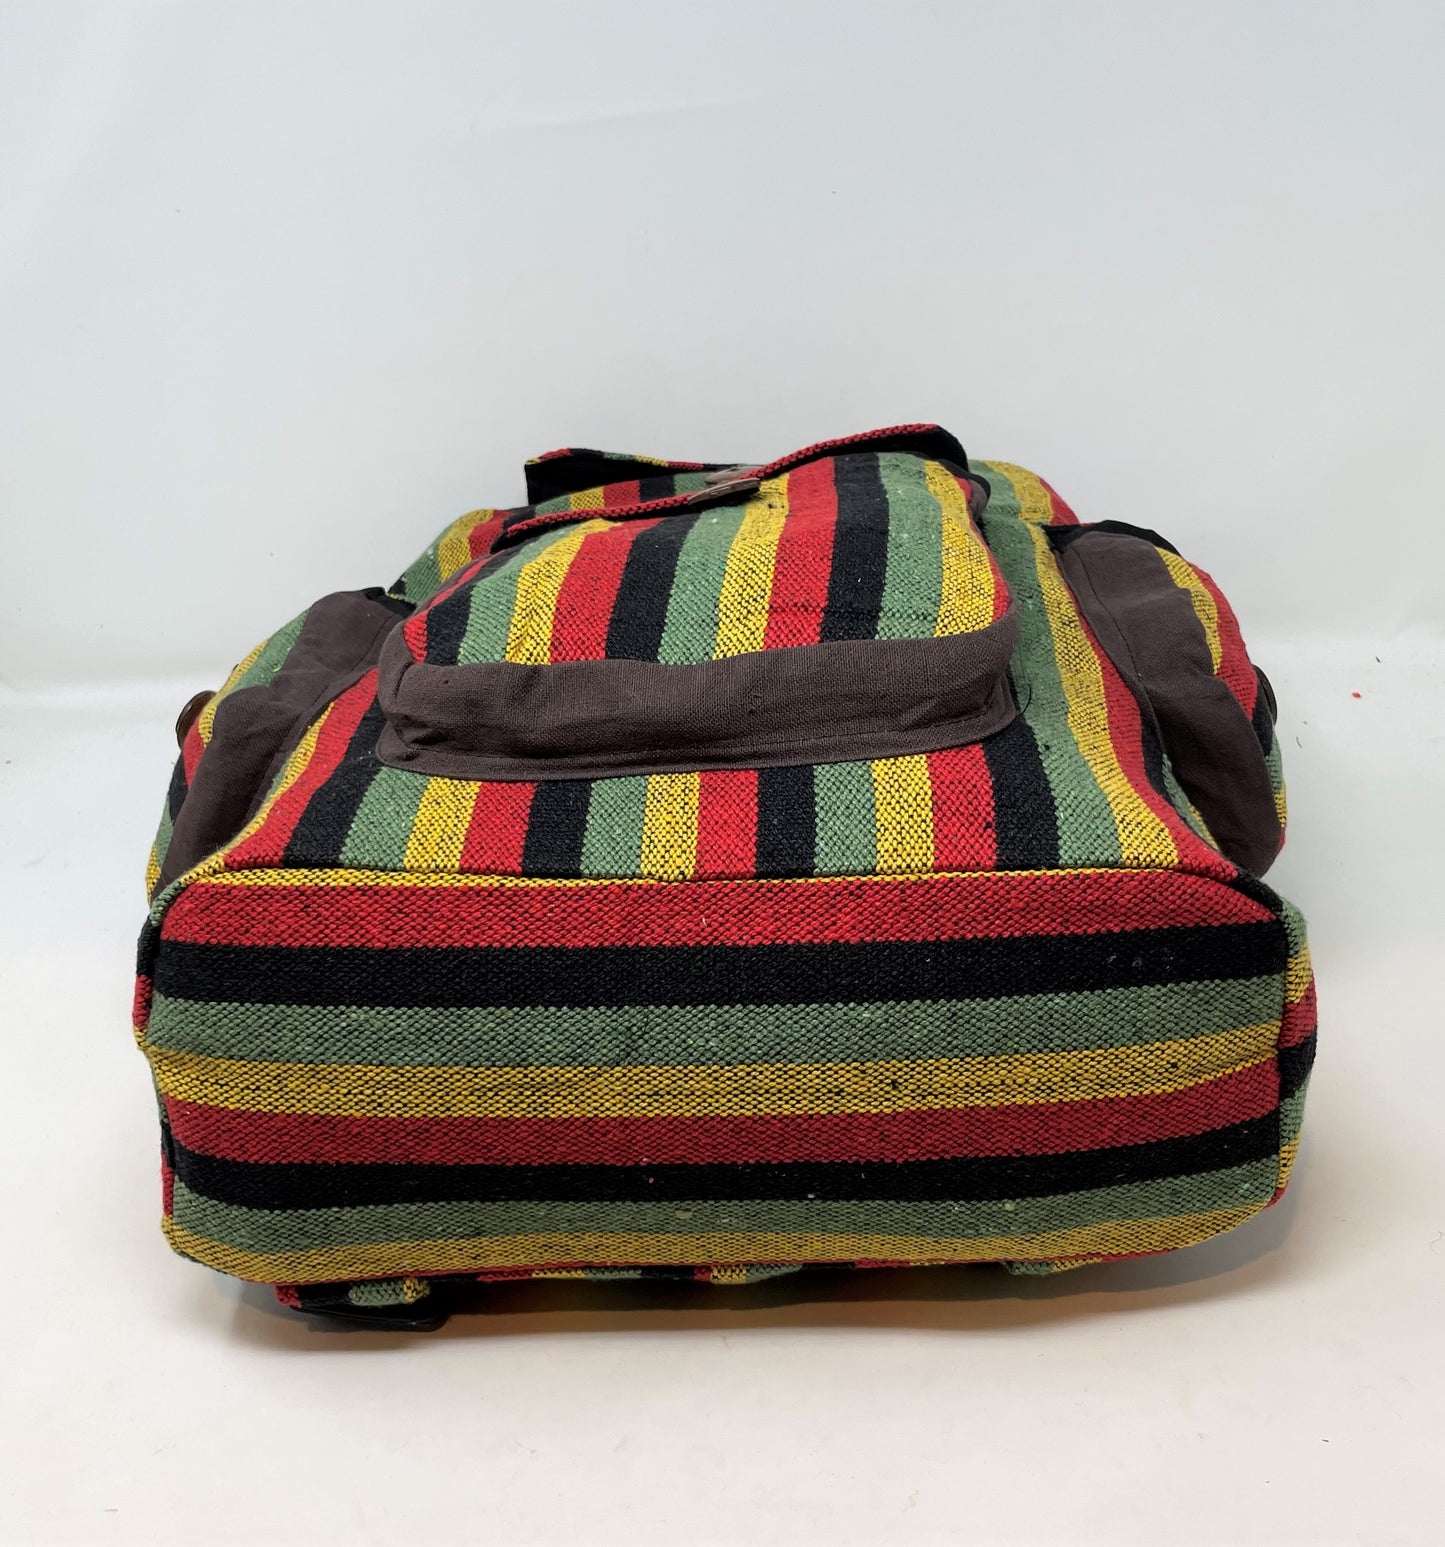 Drawstring Ghery Back Pack w/Flap and Button Pockets - Rasta Colors